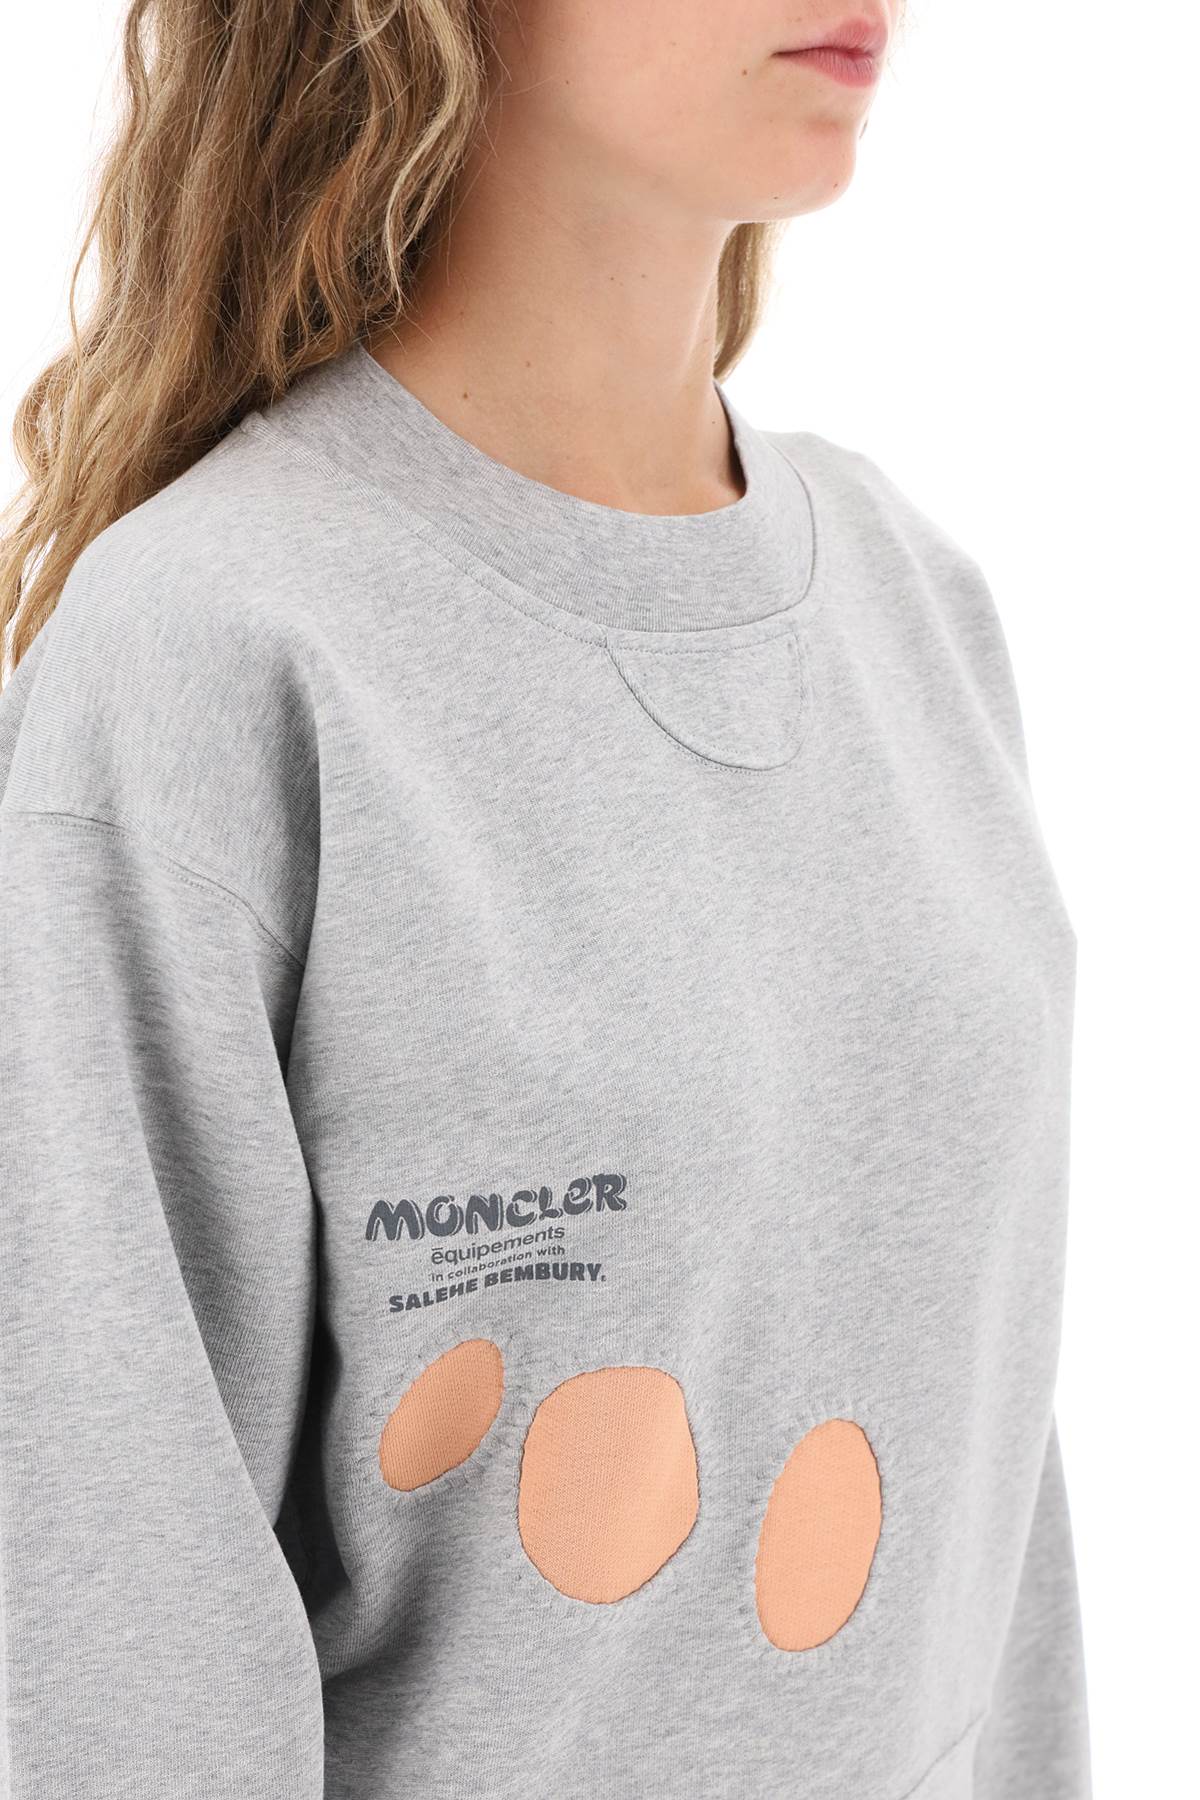 Moncler x salehe bembury sweater with cut-outs